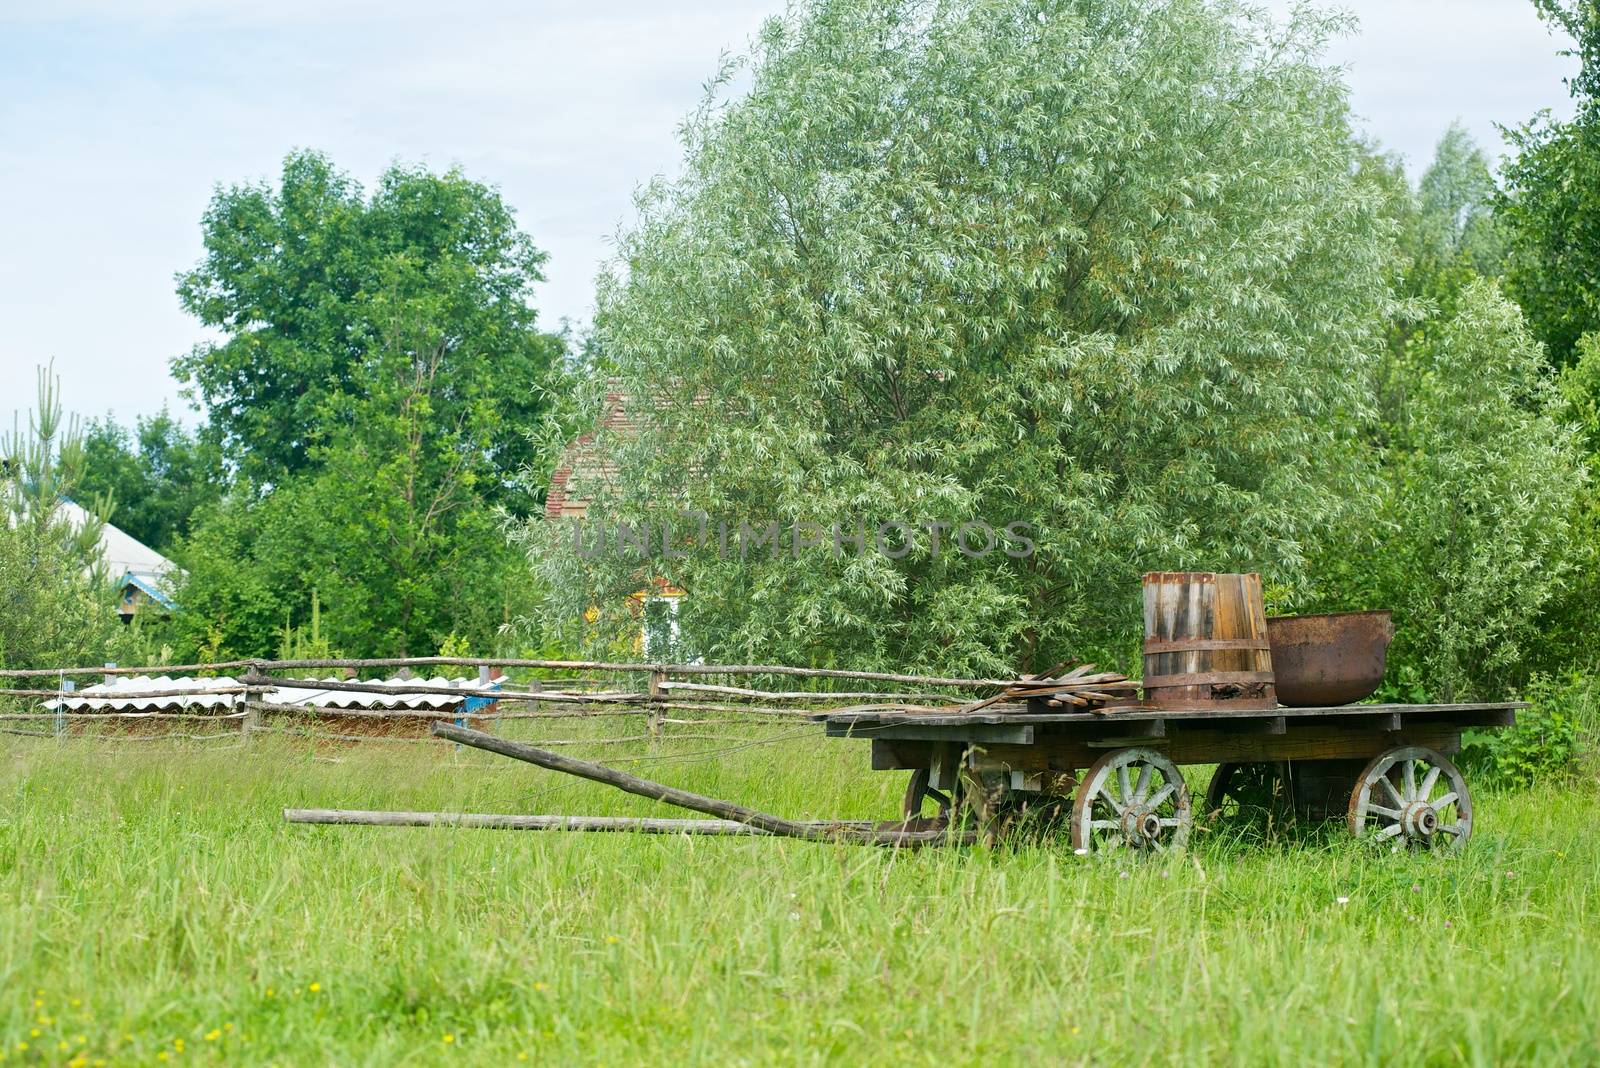 The picture of wooden cart in the grass